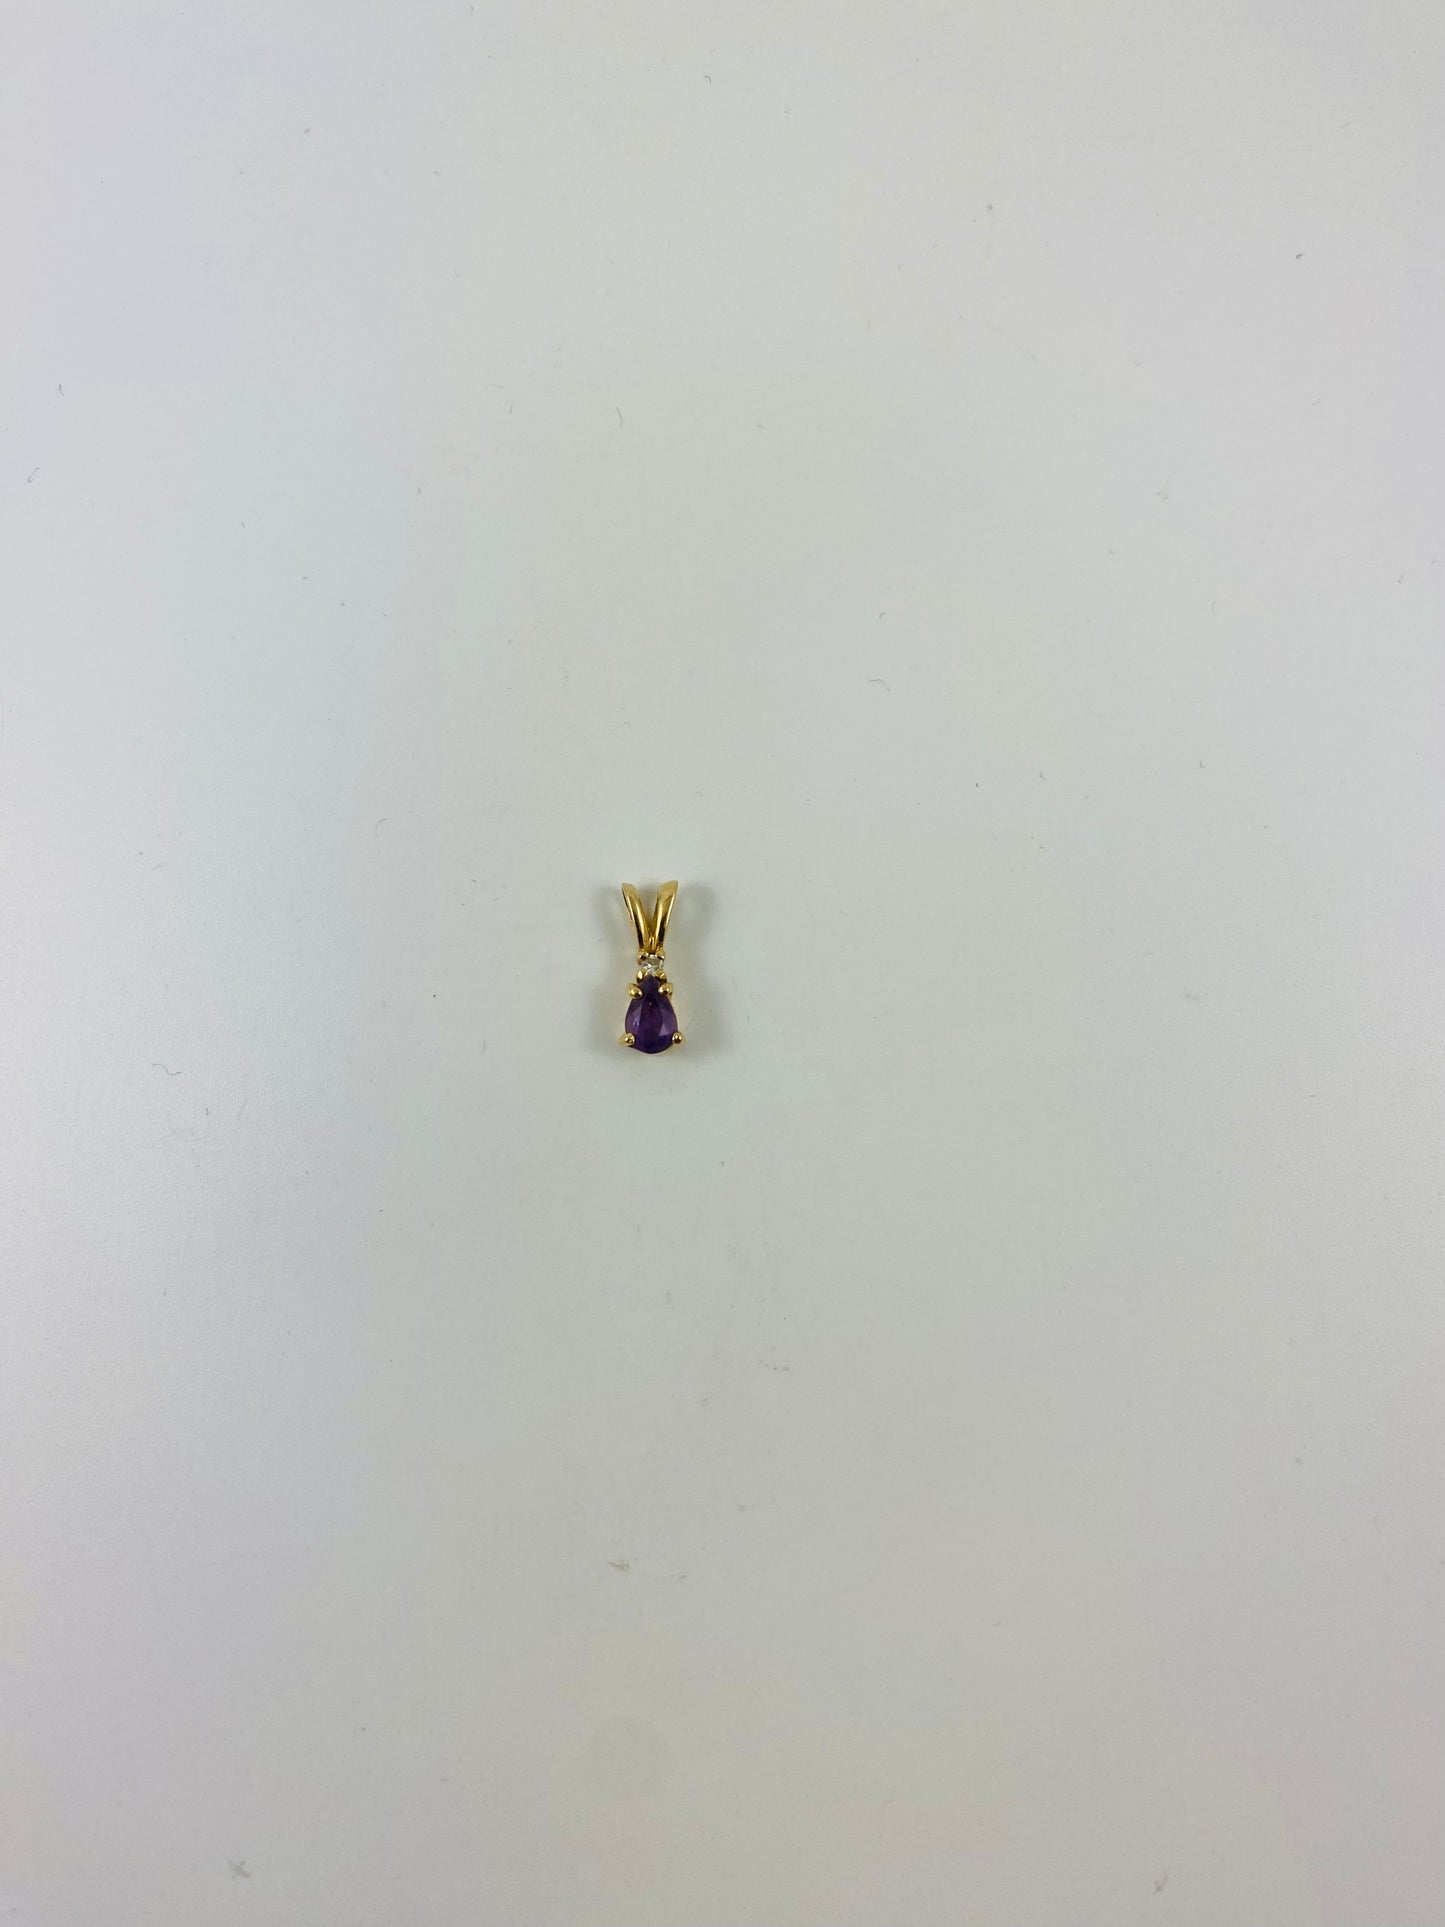 Amethyst and Diamond Pendant in Yellow Gold